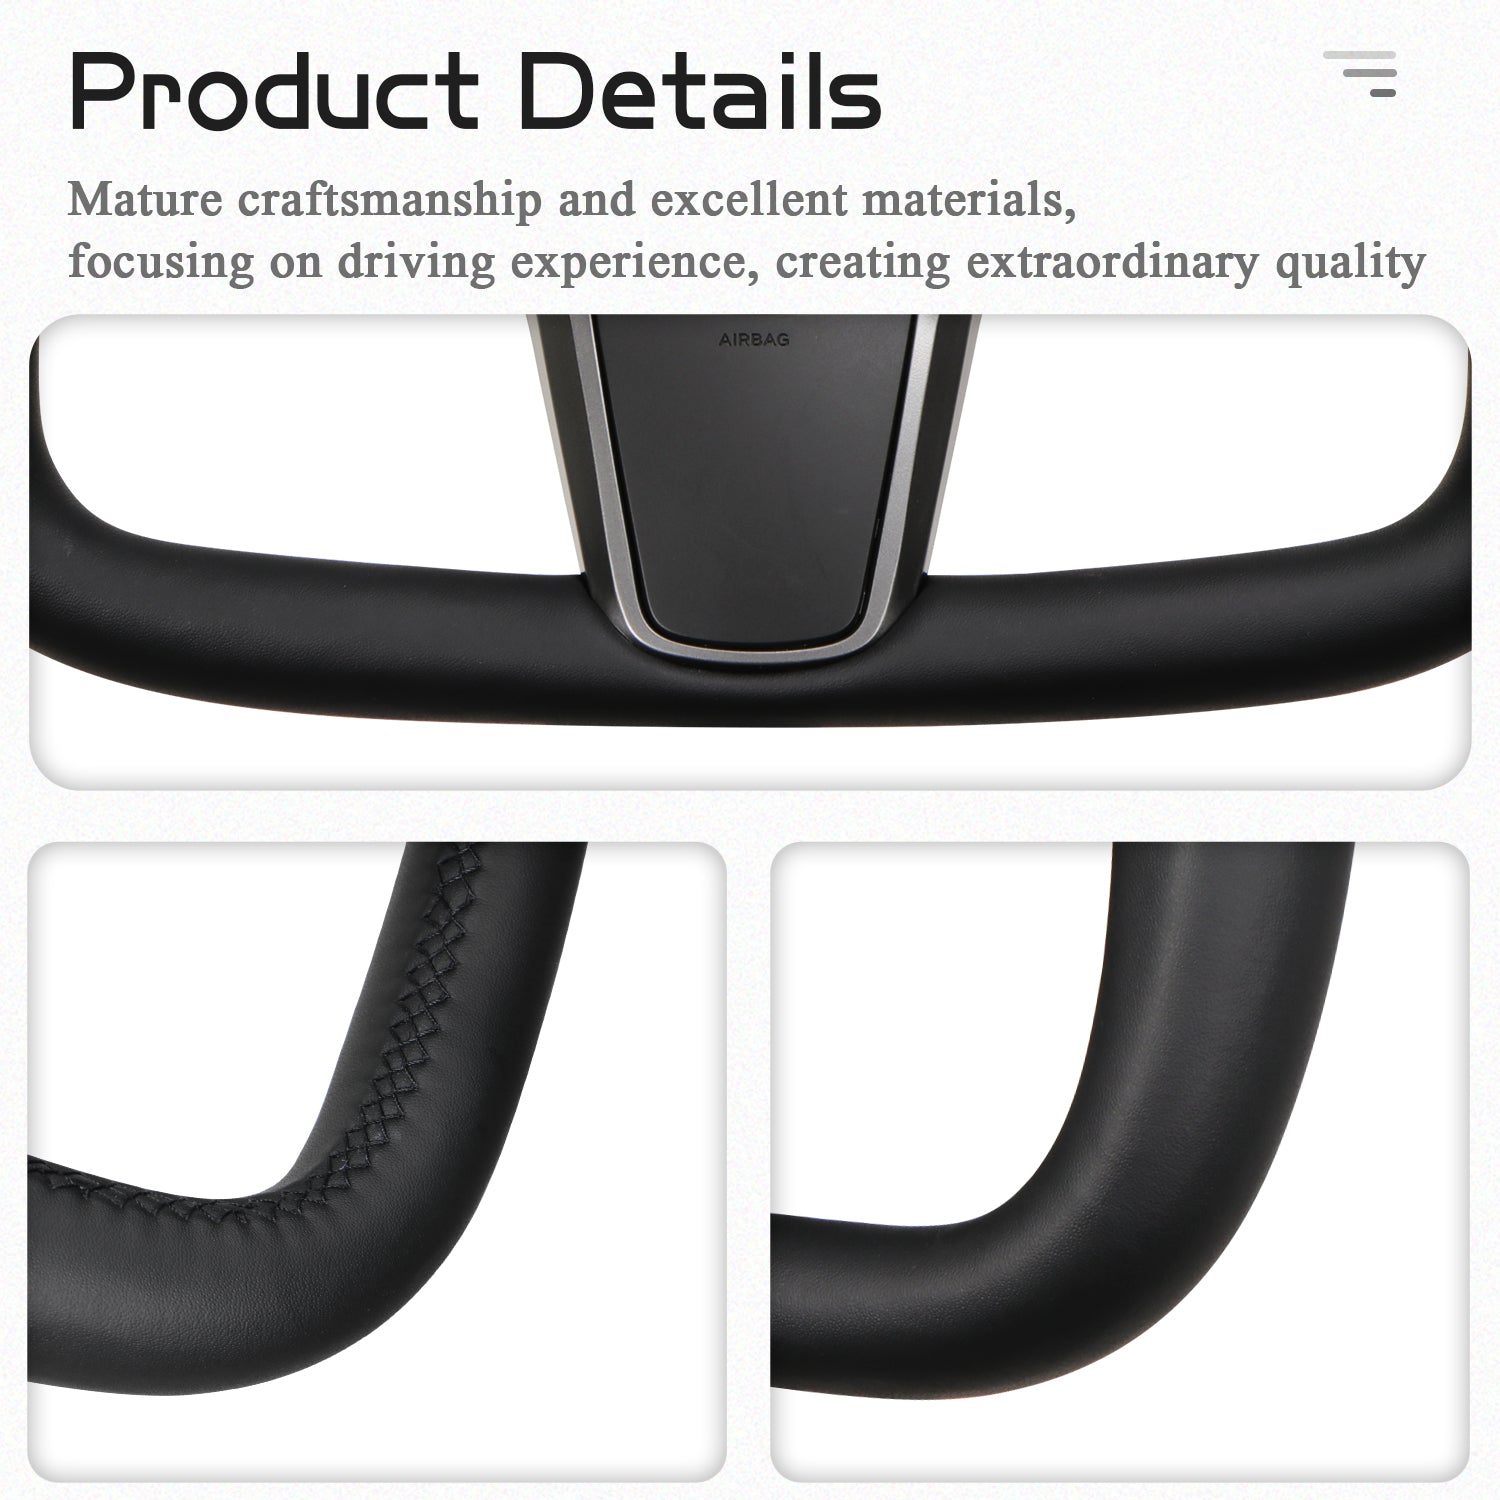 HANSSHOW Tesla Yoke Steering Wheel for Model 3/Y Ellipse Normal Black Leather with heated feature